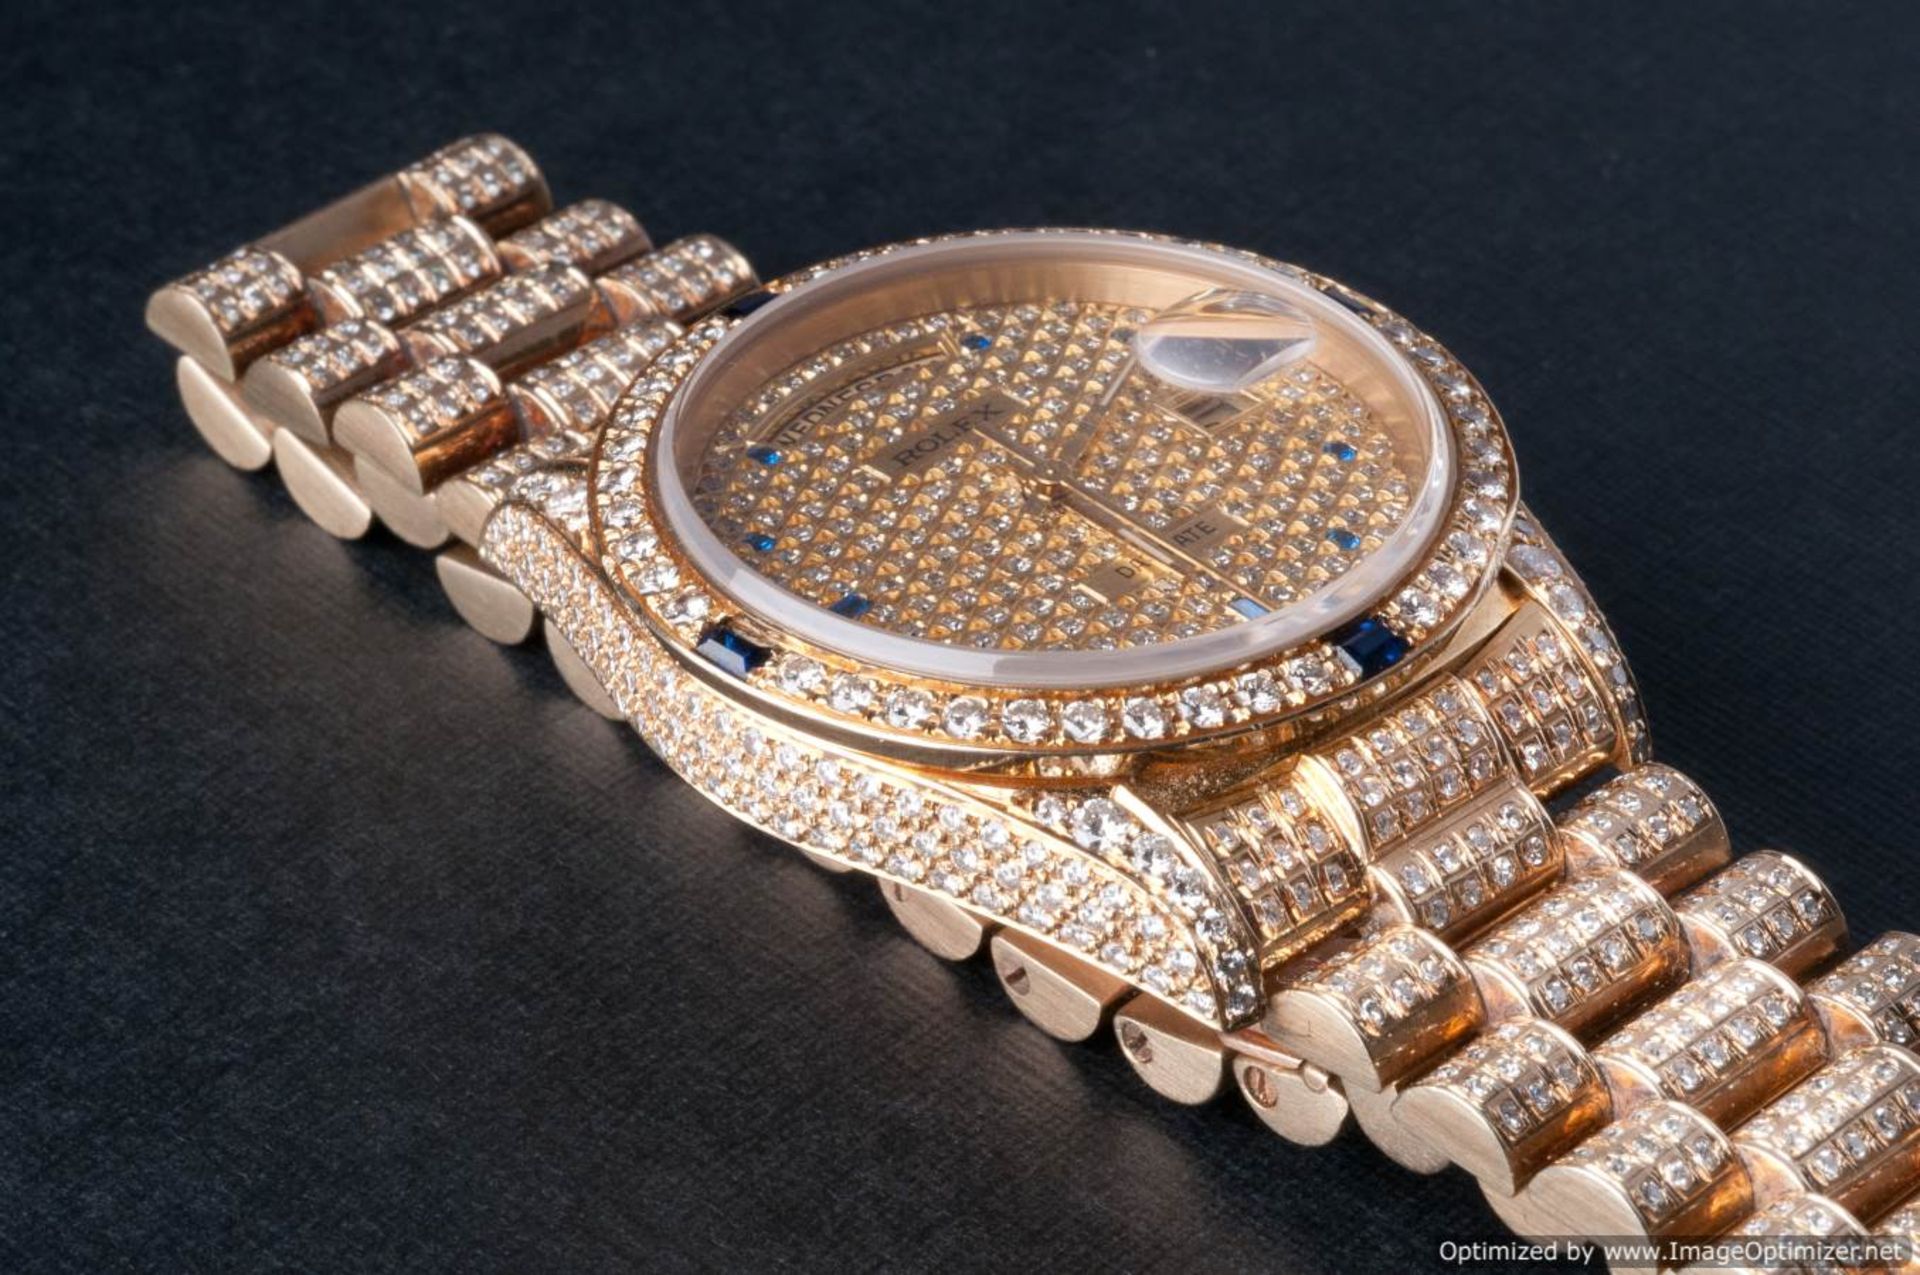 Stunning Gents 18ct Gold Rolex set with approx 10.5 Carats of Diamonds - Image 2 of 3